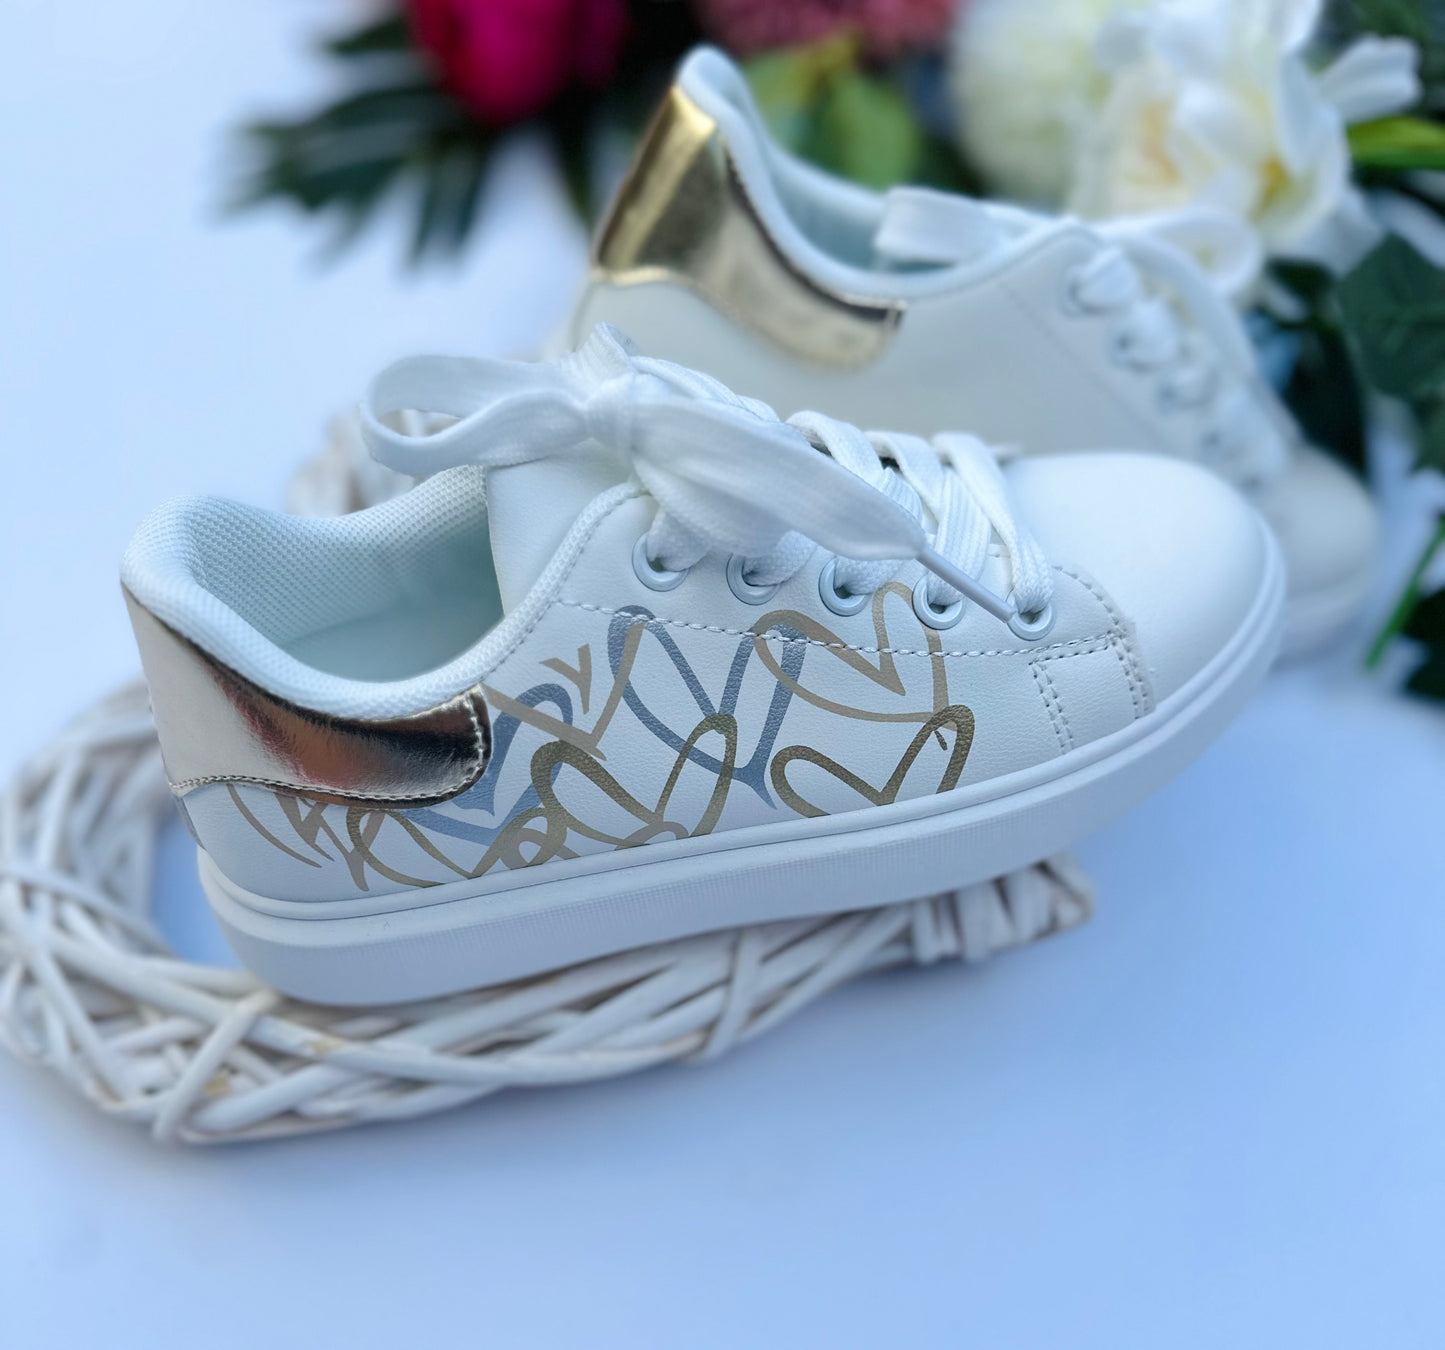 Gold heart sneakers